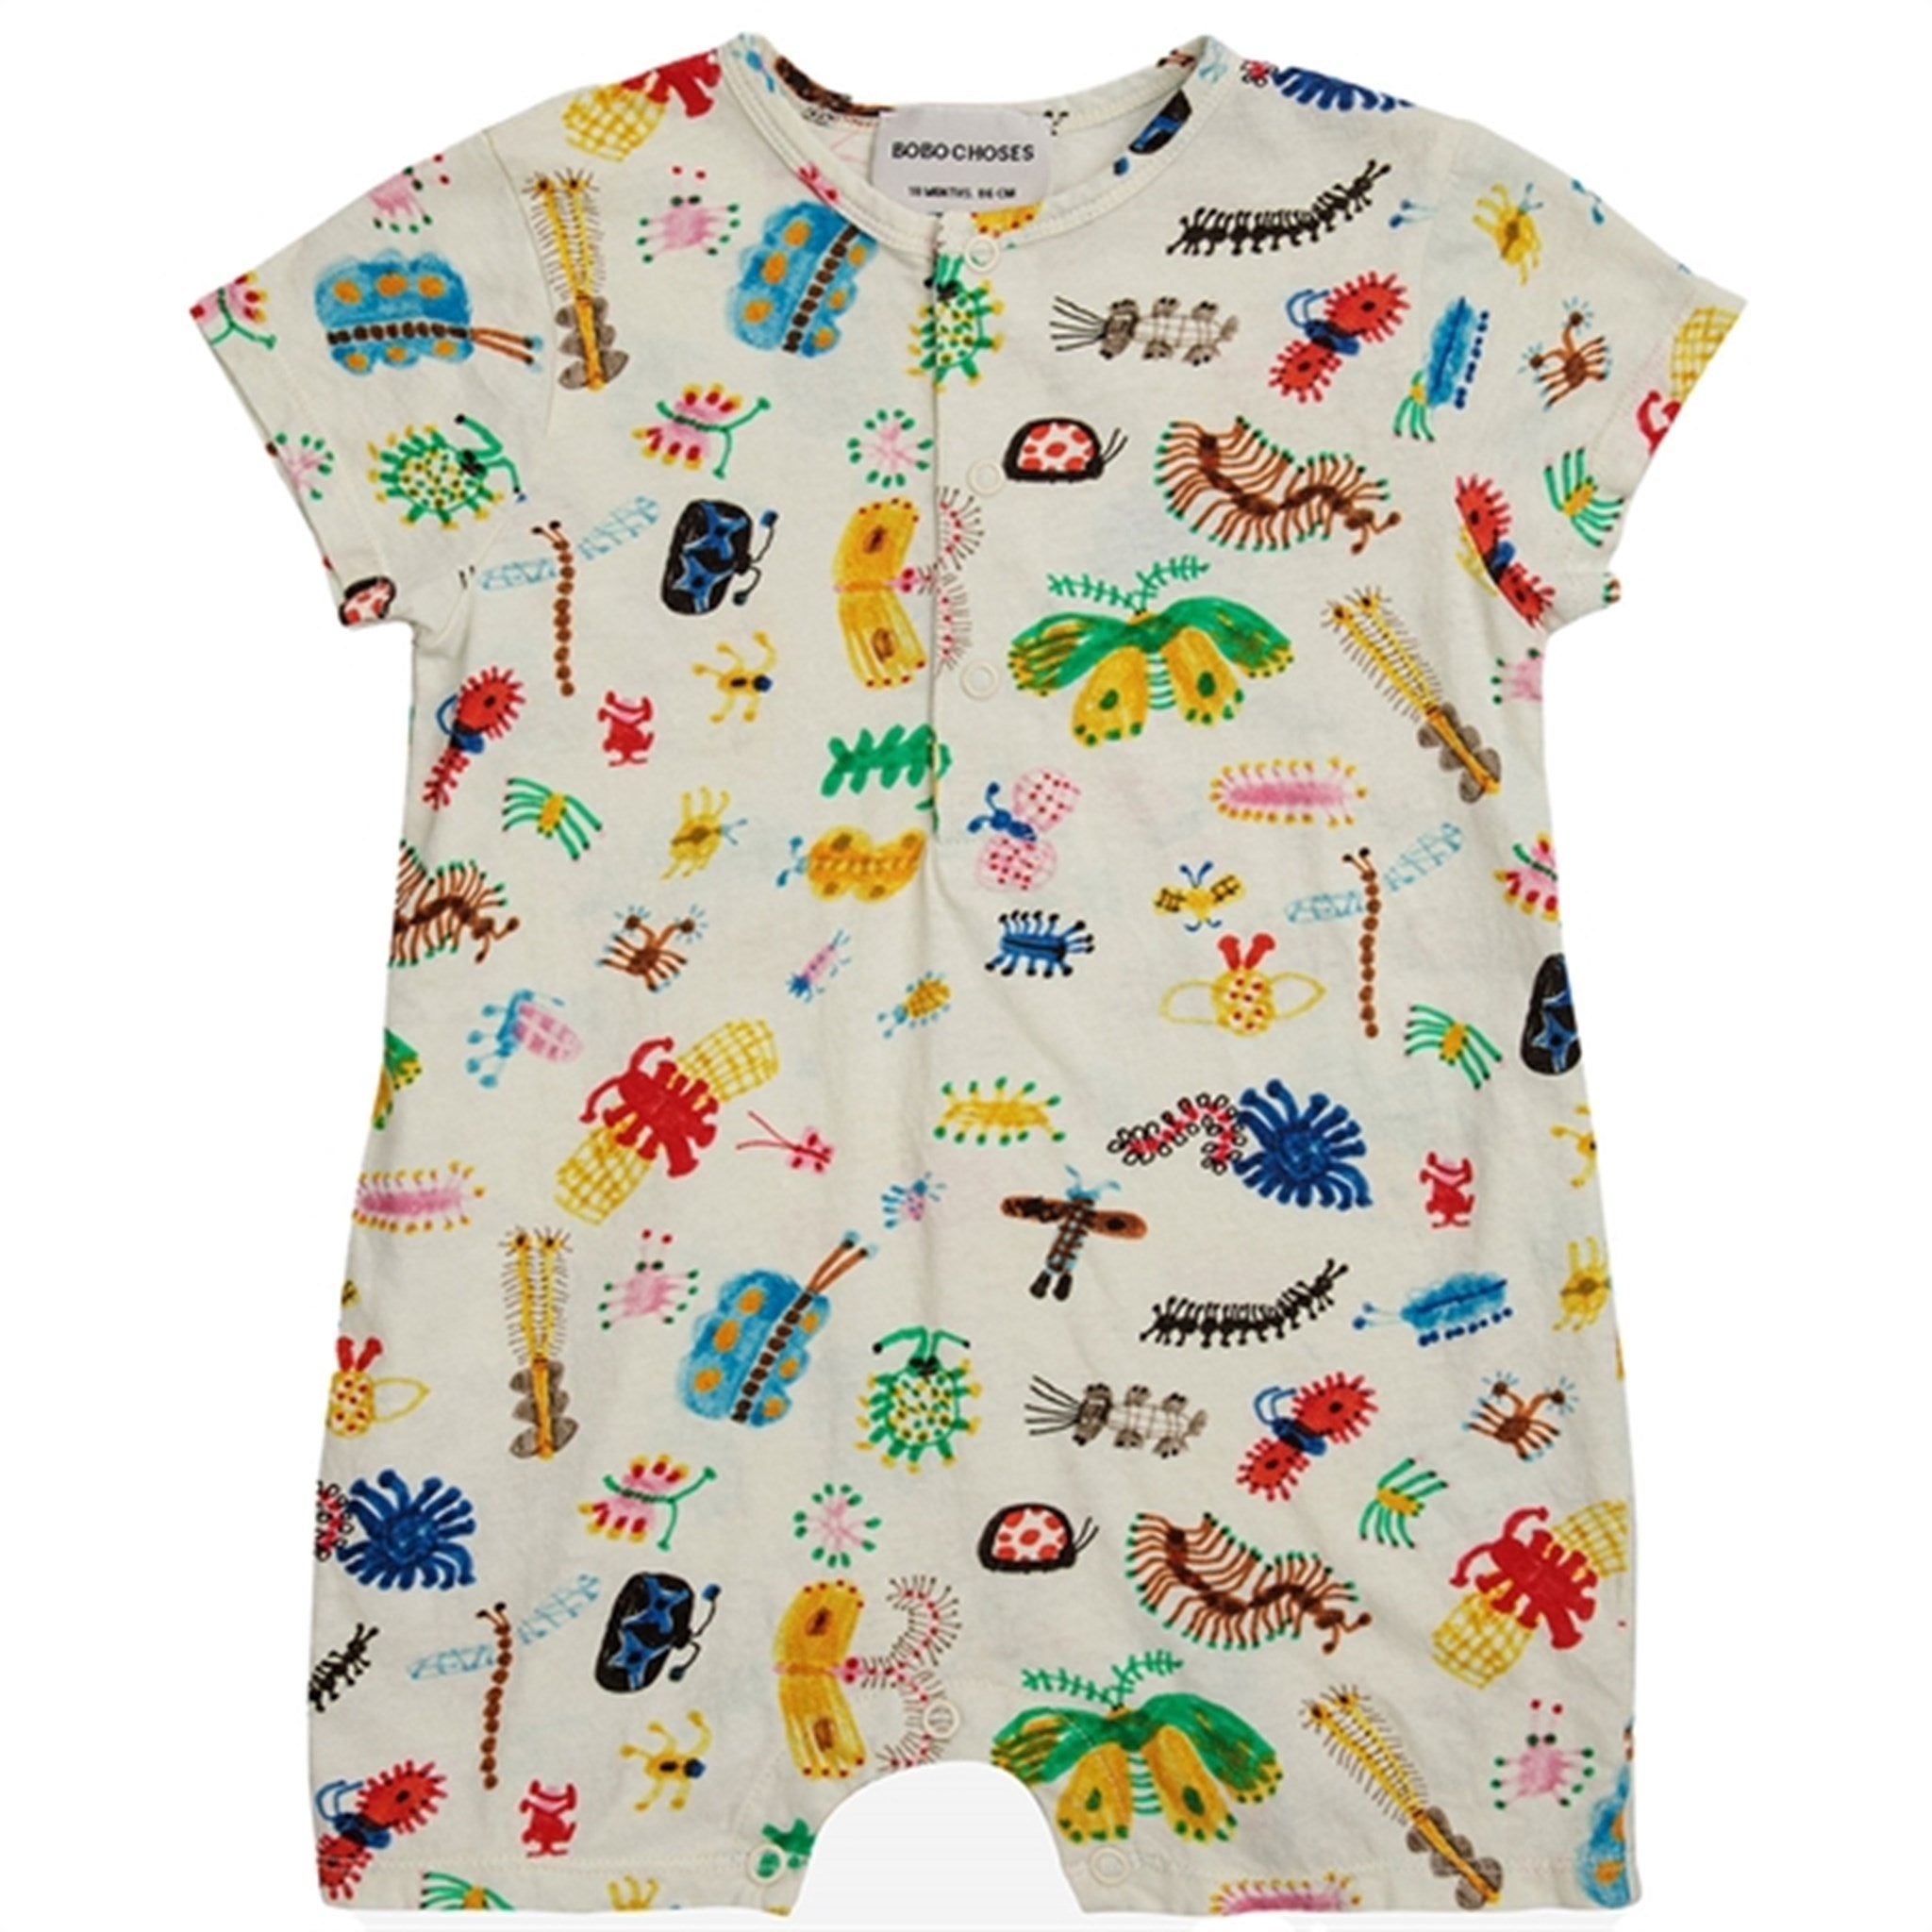 Bobo Choses Baby Fuuny Insects All Over Playsuit Short Sleeve Offwhite - Str. 3 mdr